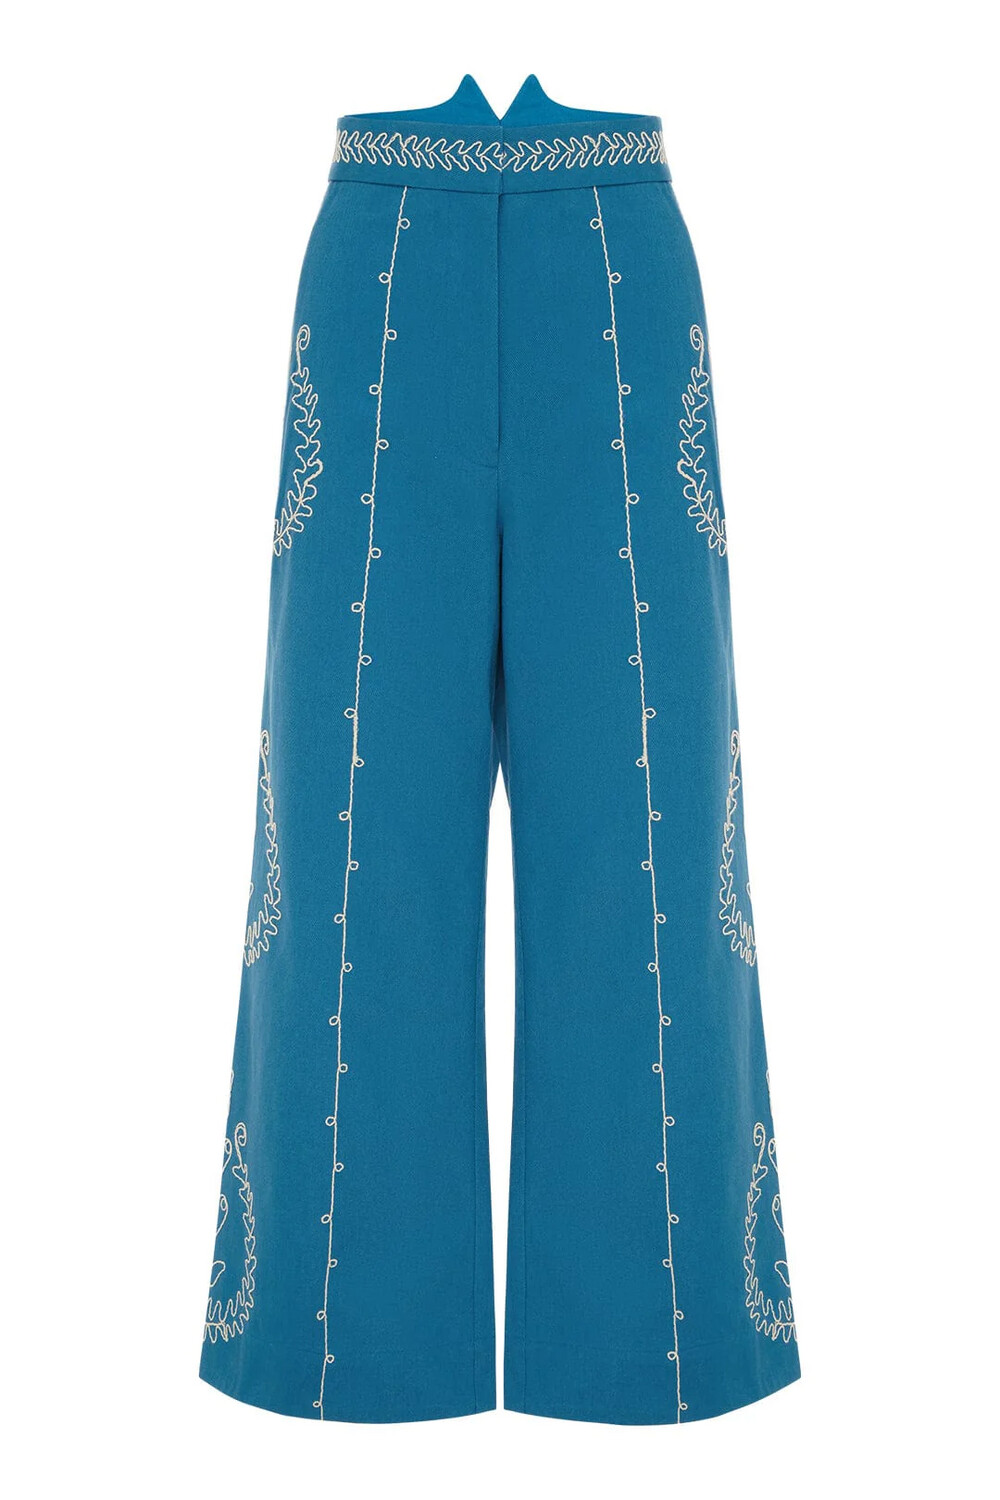 Alemais Donovan Corded Pant in Sapphire